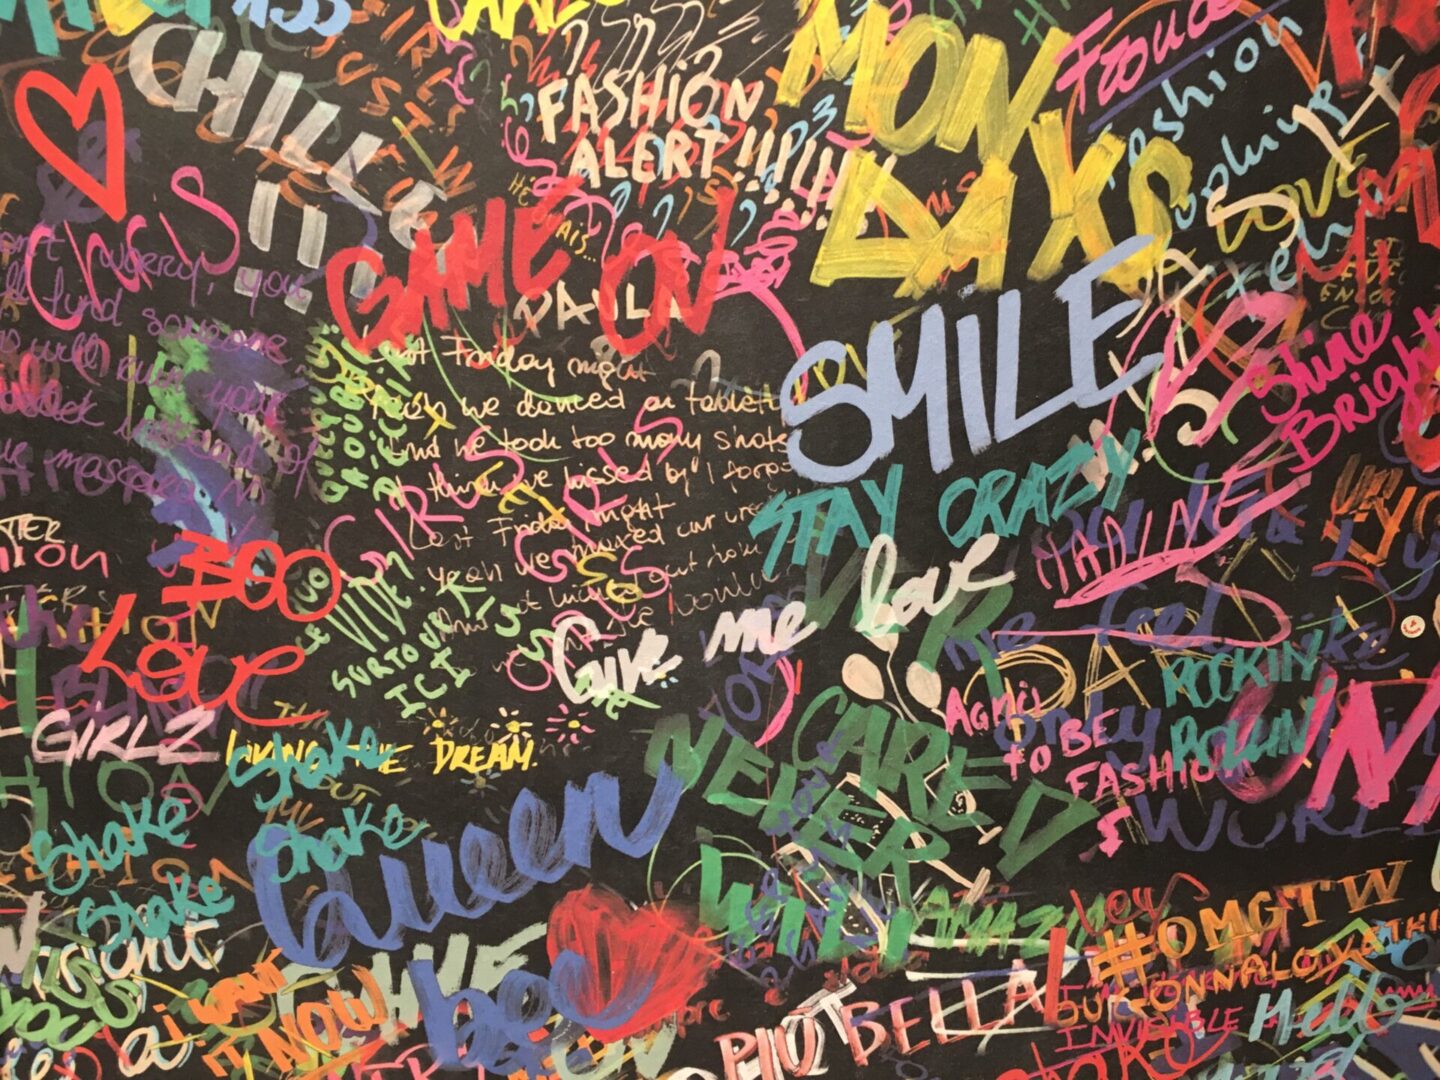 A wall covered in graffiti and writing.